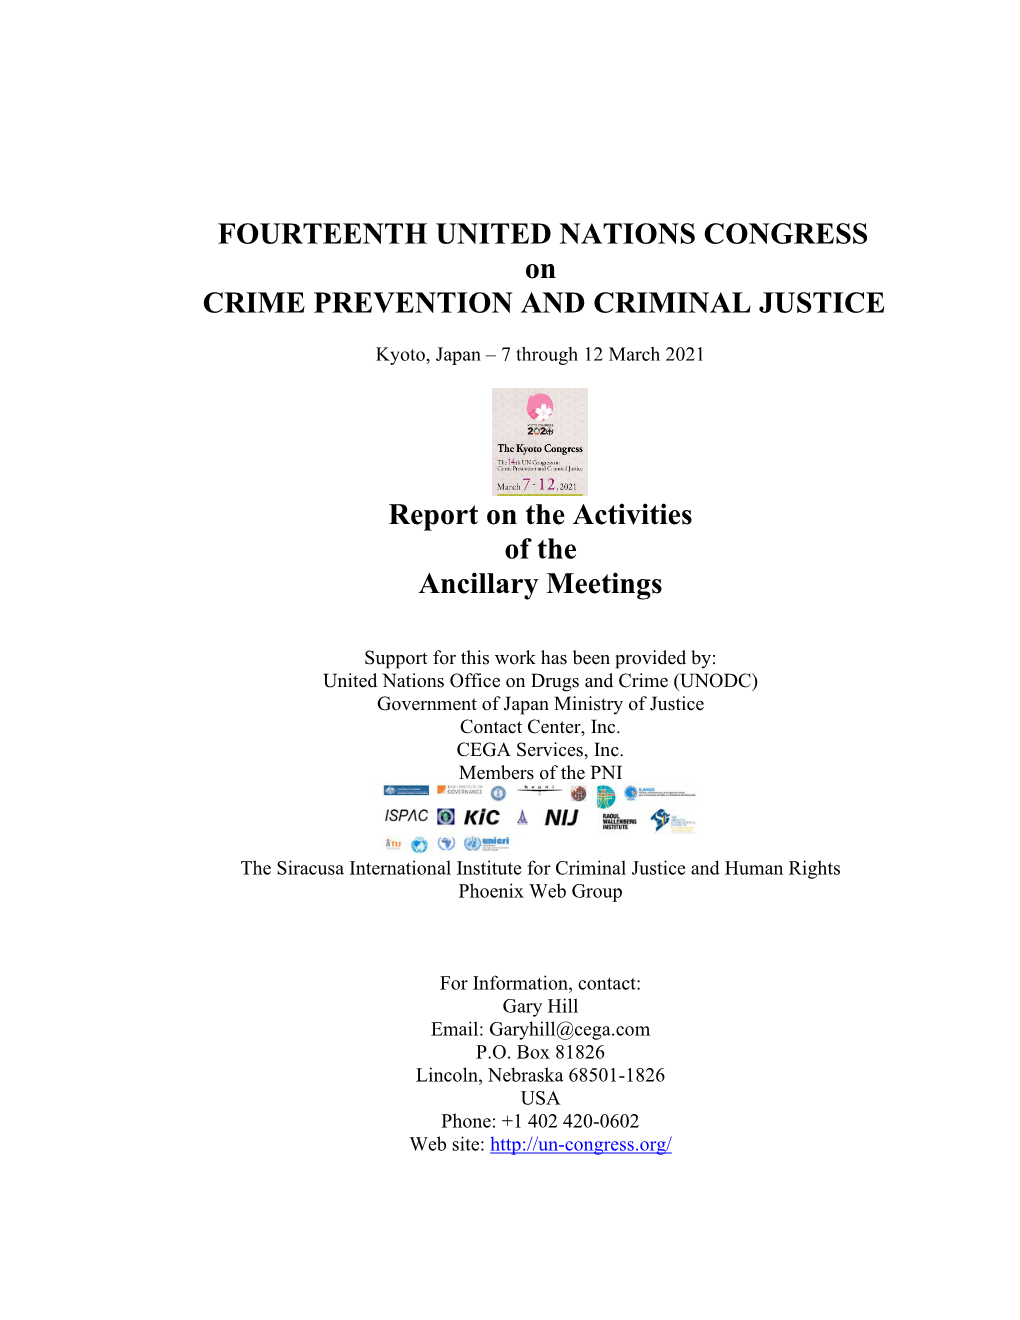 FOURTEENTH UNITED NATIONS CONGRESS on CRIME PREVENTION and CRIMINAL JUSTICE